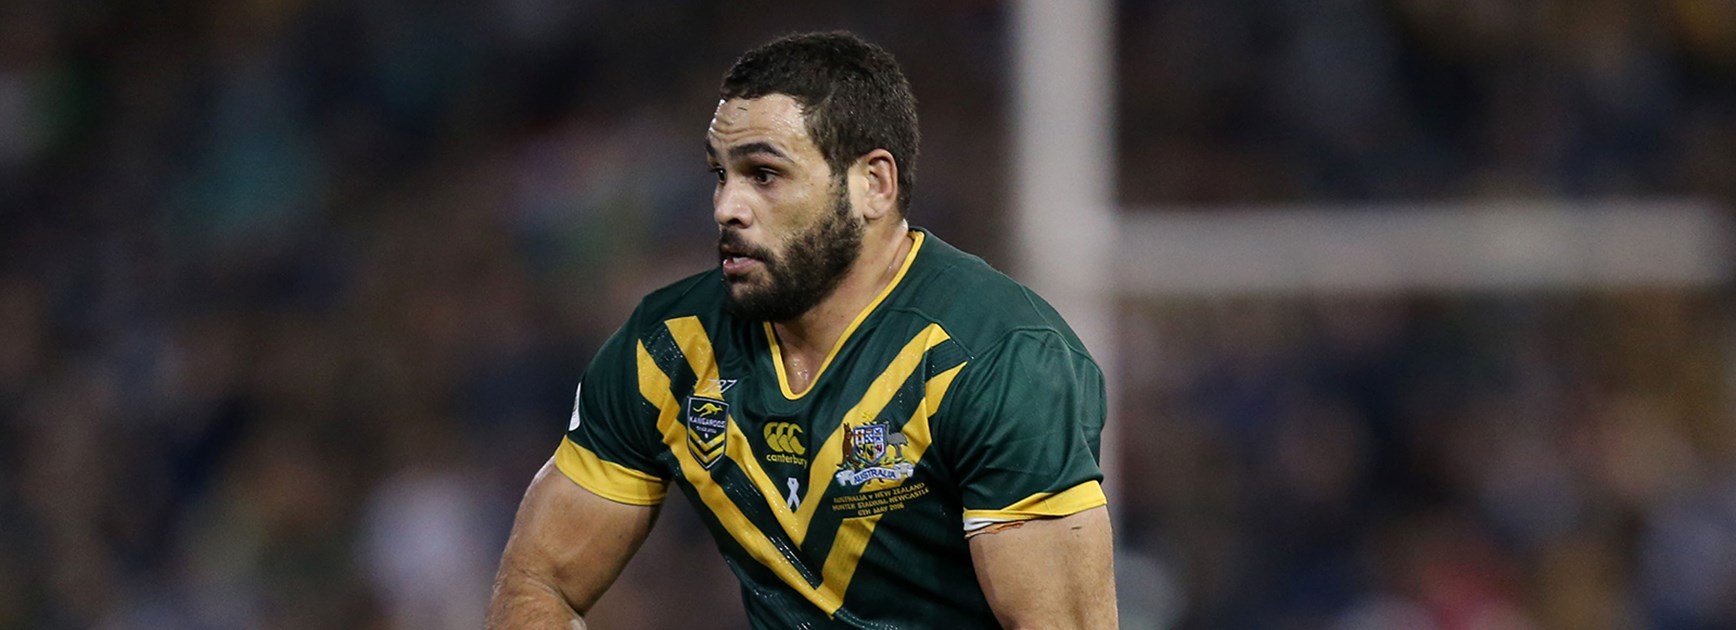 Greg Inglis has been named captain of the Prime Minister's XIII for their clash with PNG in Port Moresby.